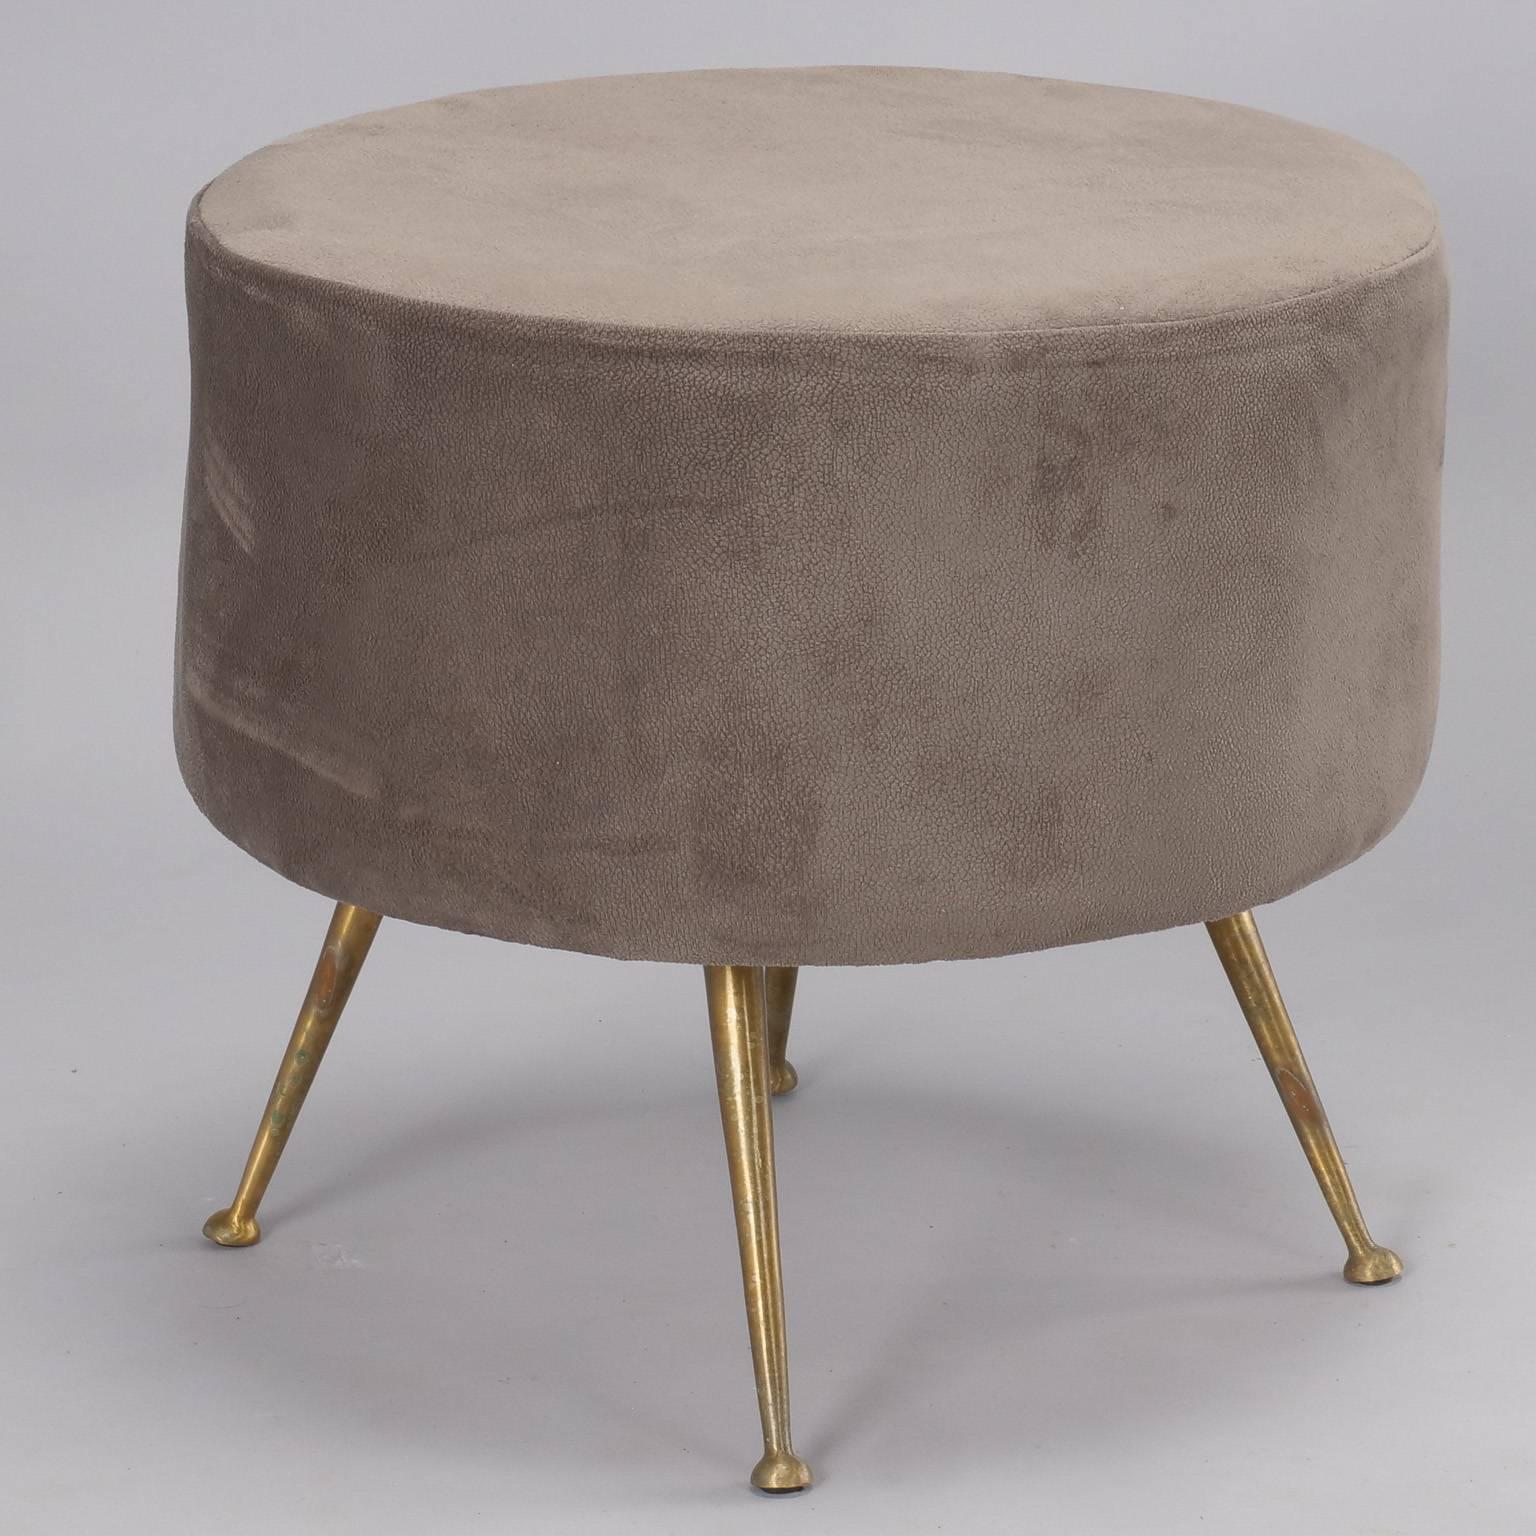 Mid-Century Italian round upholstered stool in style of Gio Ponti upholstered in a light taupe colored moleskin fabric with slim, tapered brass legs. Two stools available at time of posting, sold and priced individually.
 